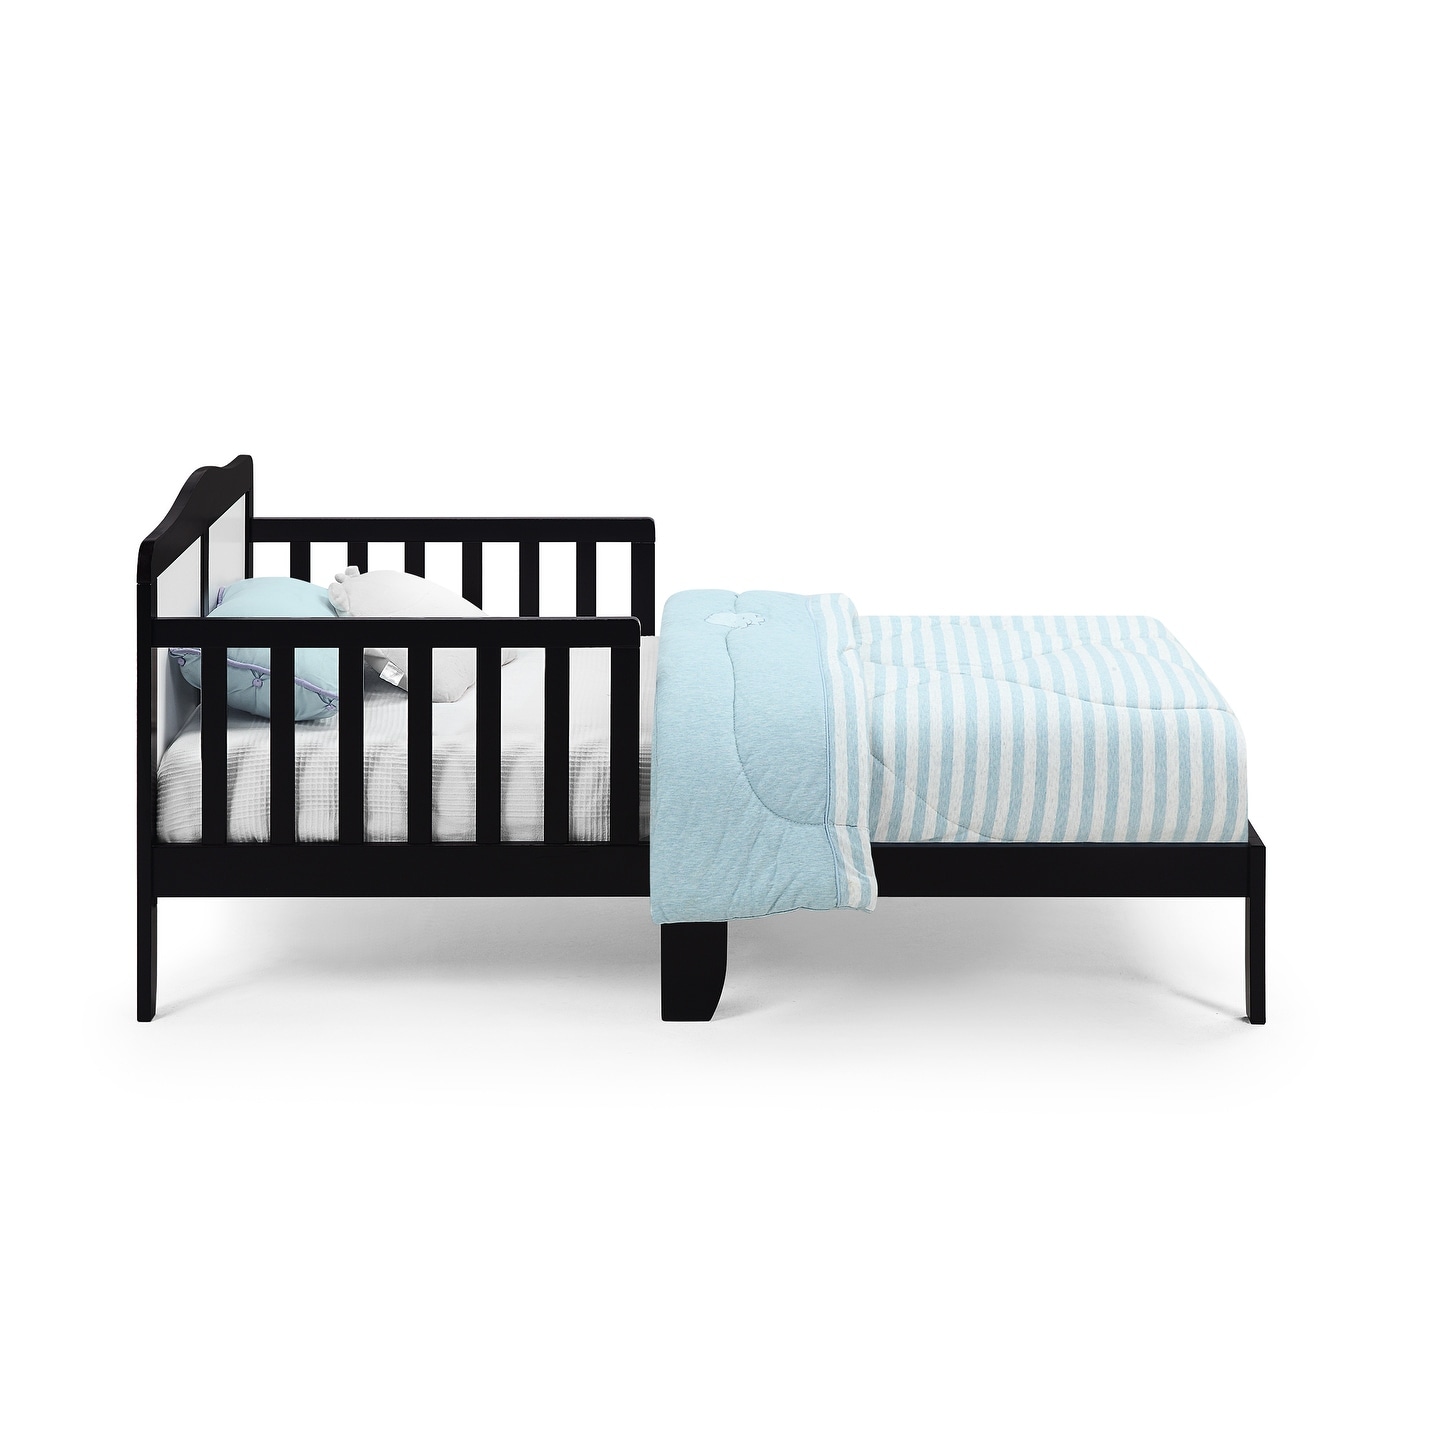 Wooden Toddler Bed, 53 x 29.5 x 24.50 Inch Crib, Stylish Style for Kids Bedrooms